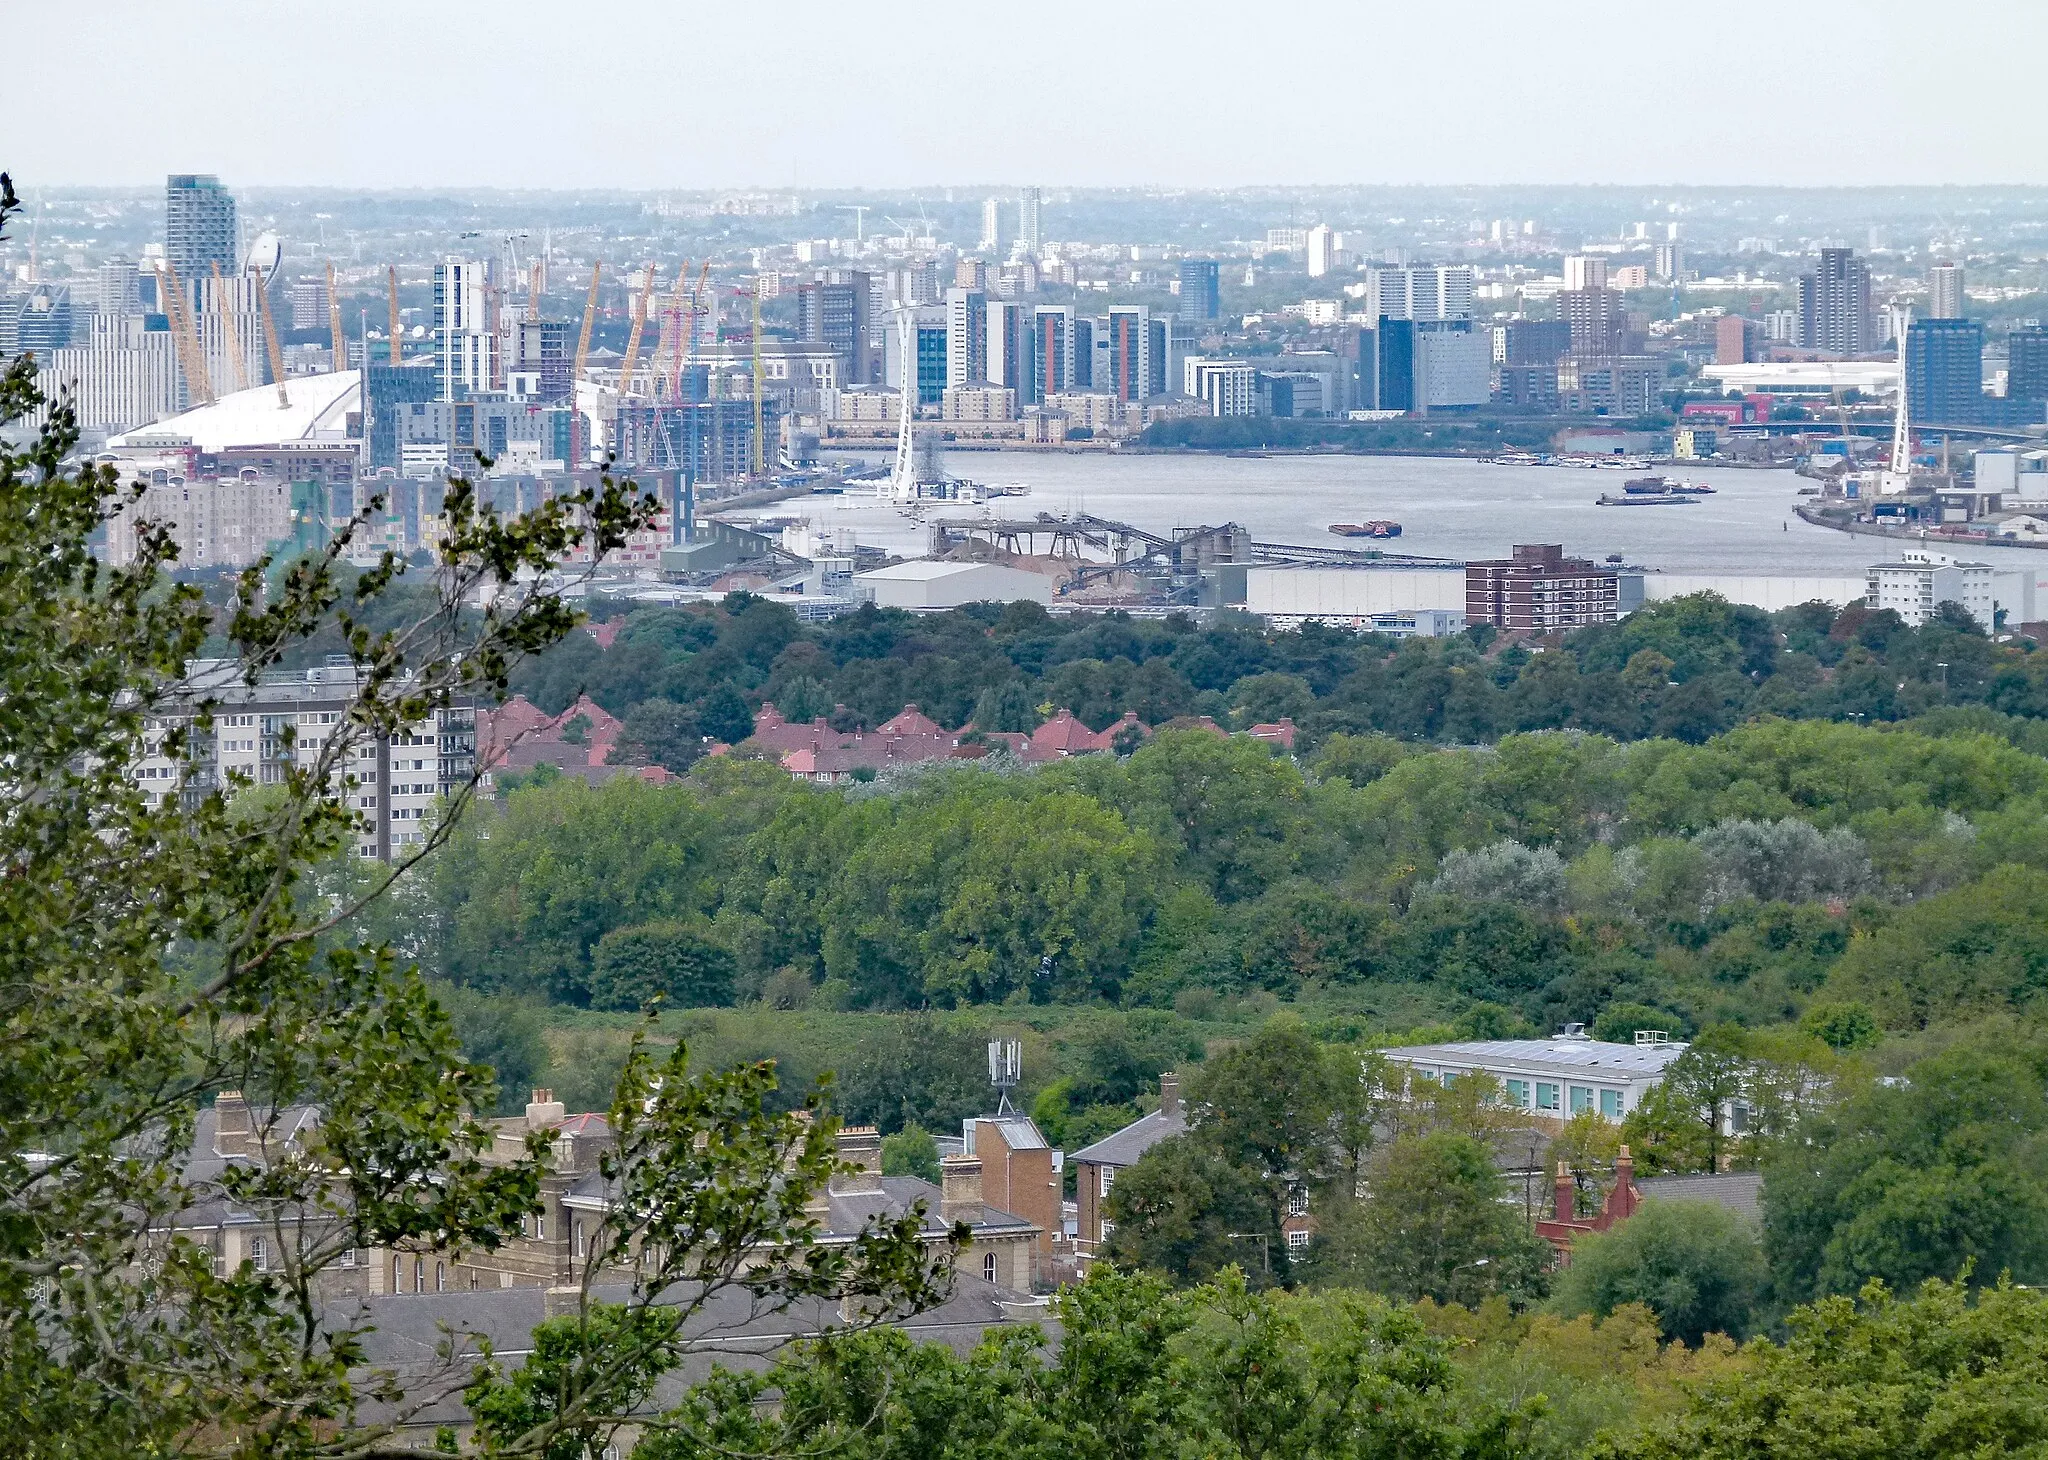 Photo showing: View towards the northwest from the top of Severndroog Castle, Shooters Hill, South east London, UK. Foreground left: Herbert Hospital. Centre: Woolwich Common, Charlton Riverside and river Thames. Background left: Greenwich Peninsula.